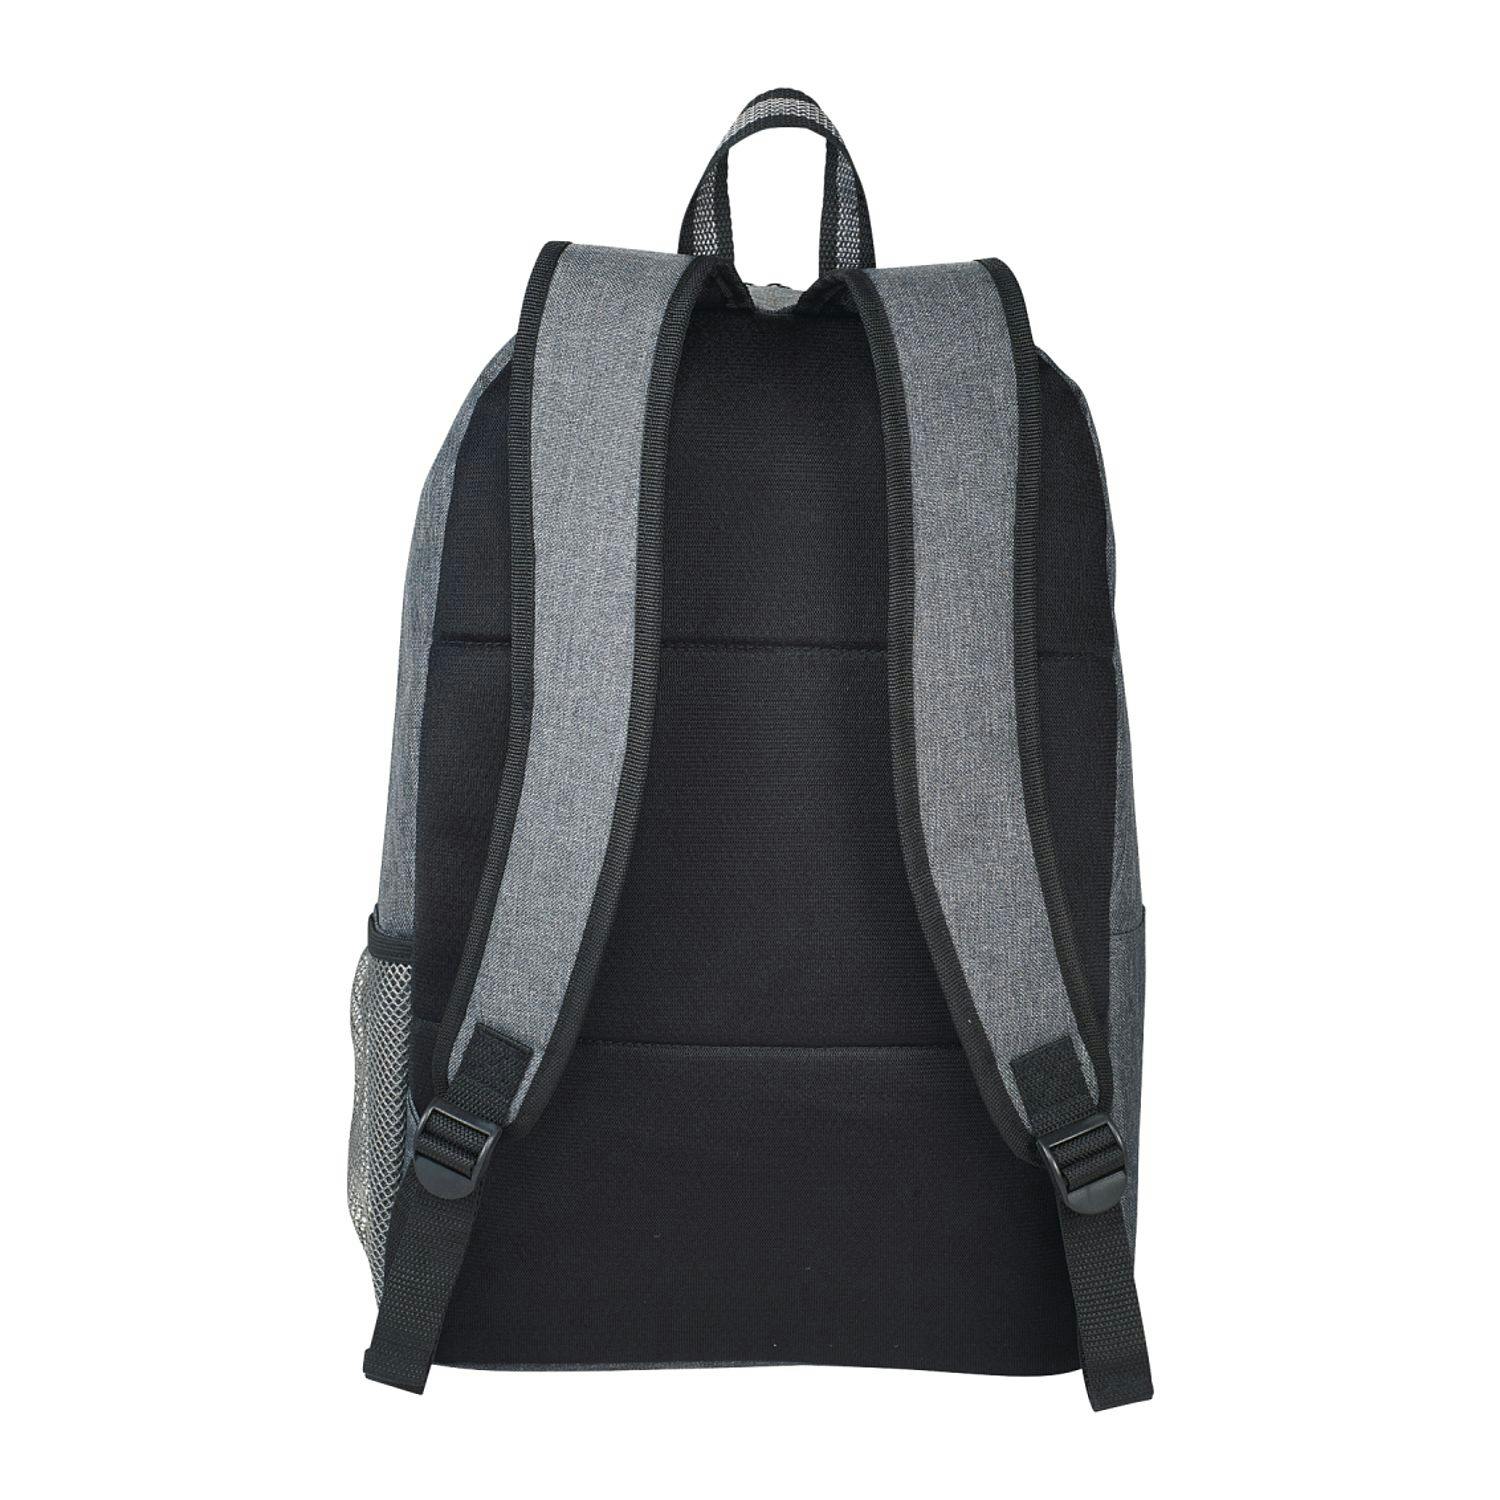 Graphite Deluxe 15" Computer Backpack - additional Image 4